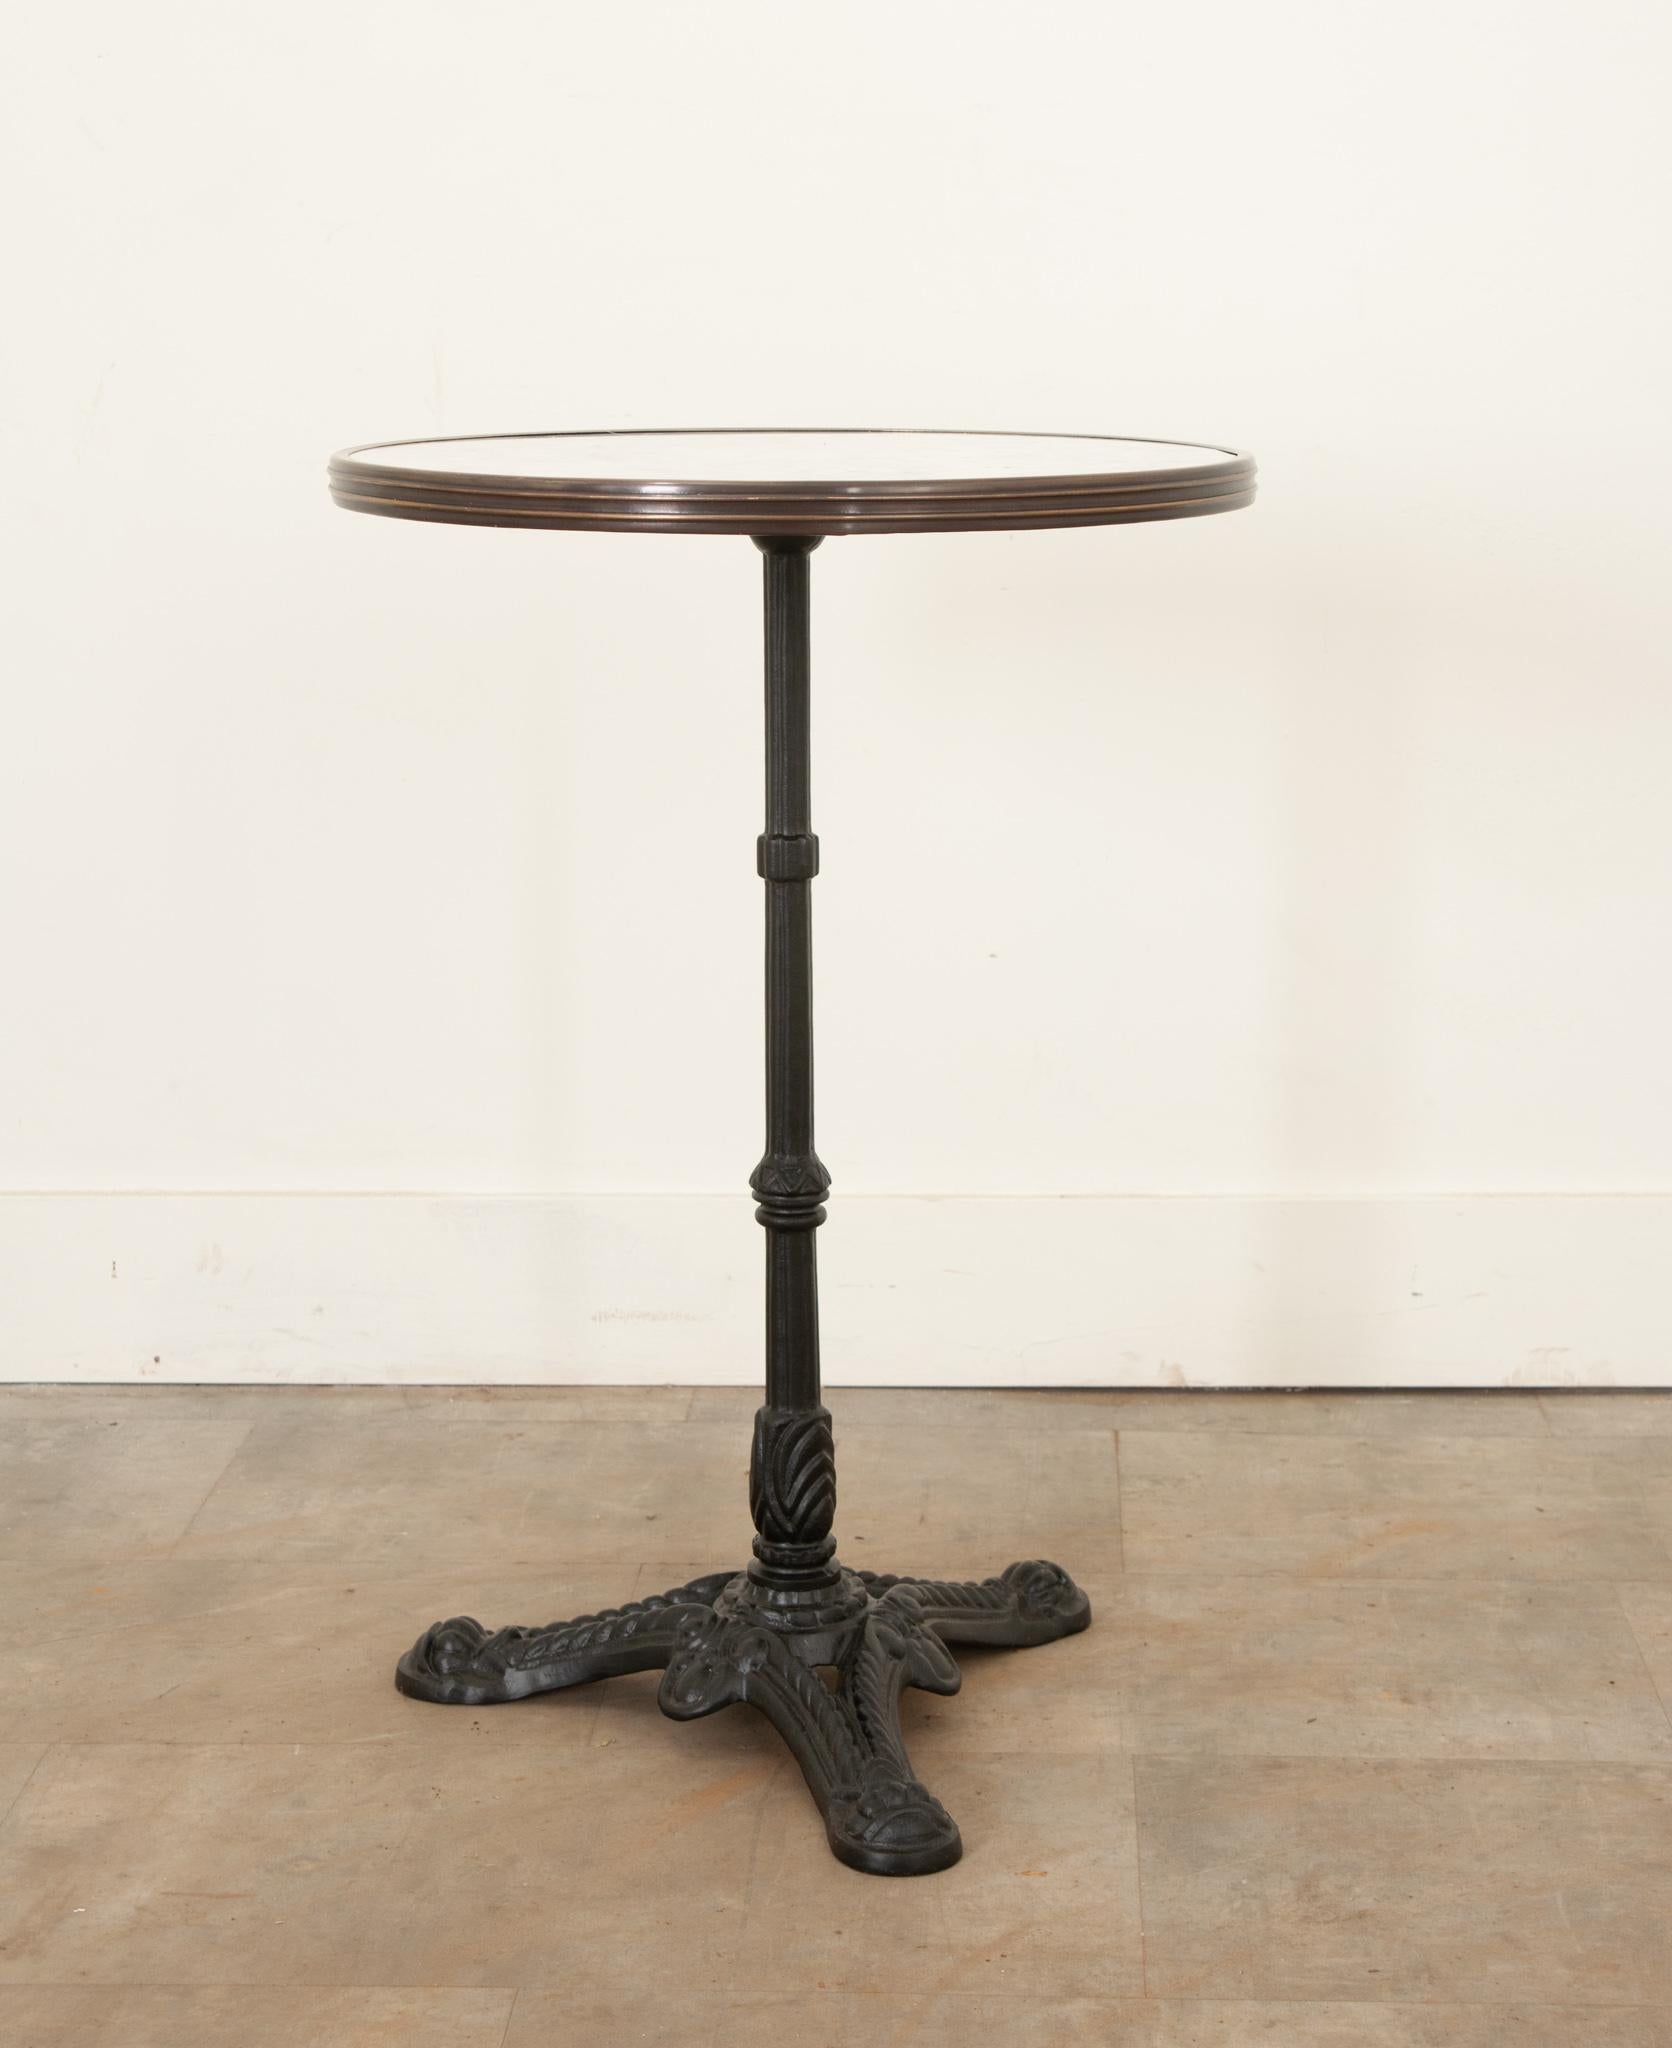 This classically designed bistro table is the perfect way to elevate any small dining space or bar room. Originally made popular during Paris’ Belle Époque, marble bistro tables such as this one, continue to be used in restaurants and bistros